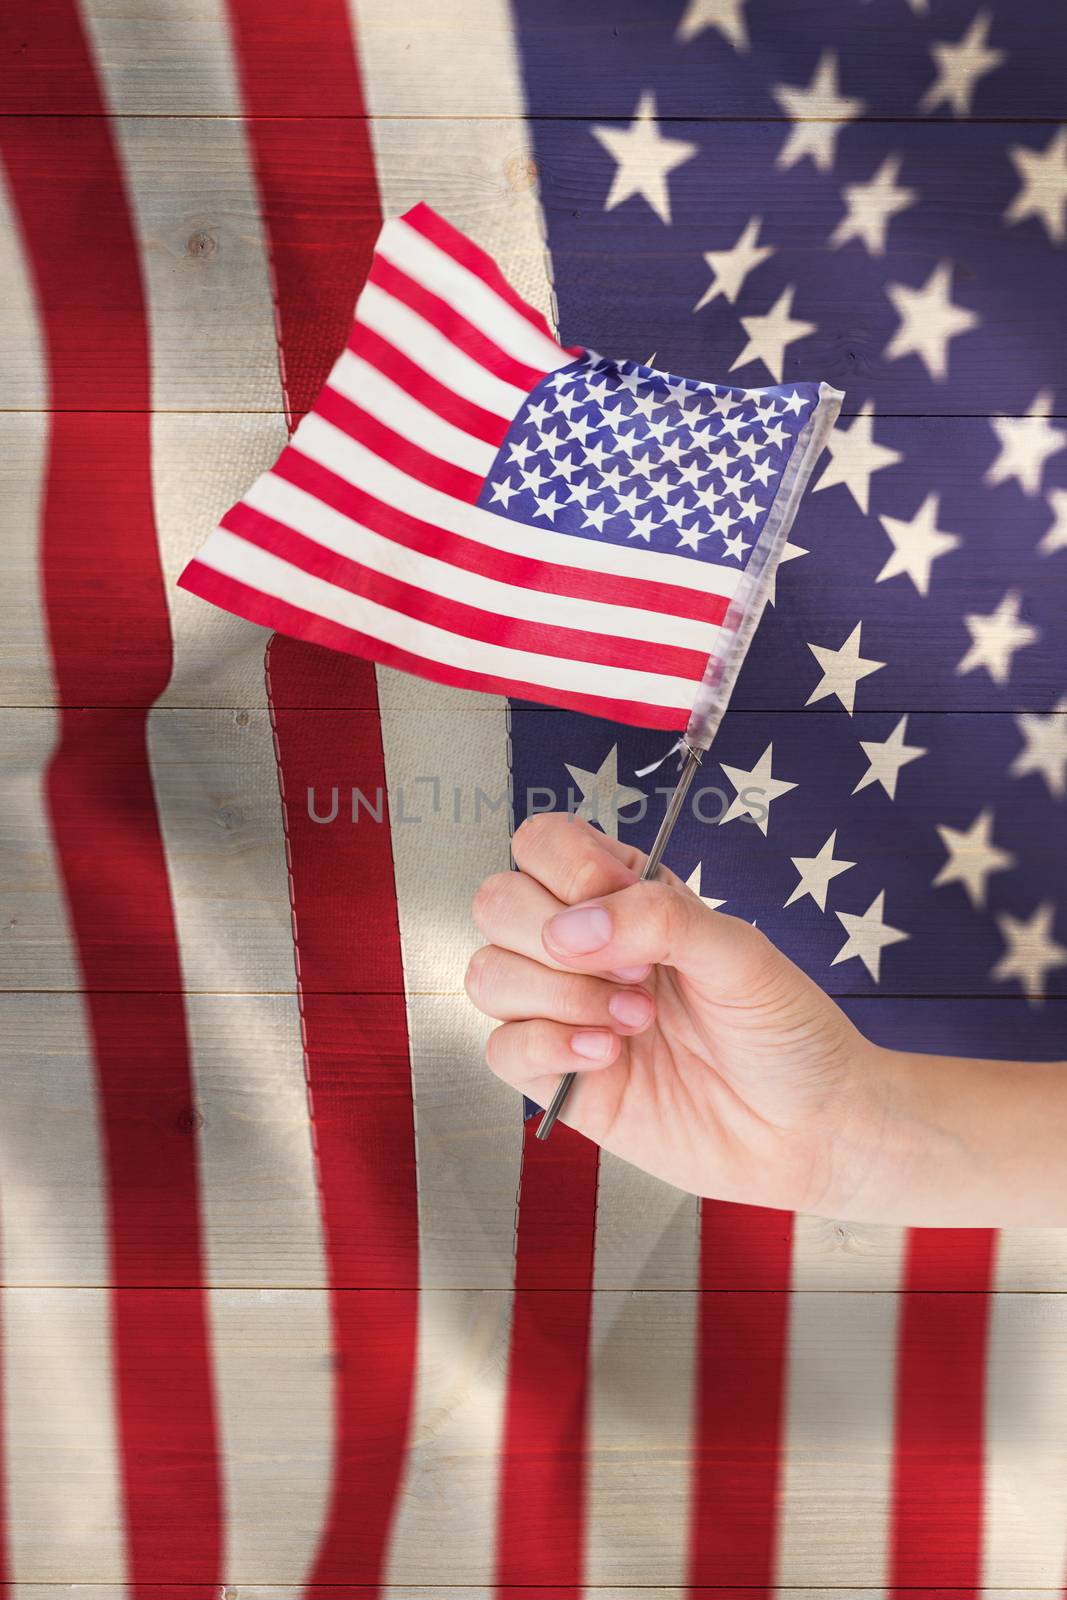 Composite image of hand waving american flag by Wavebreakmedia